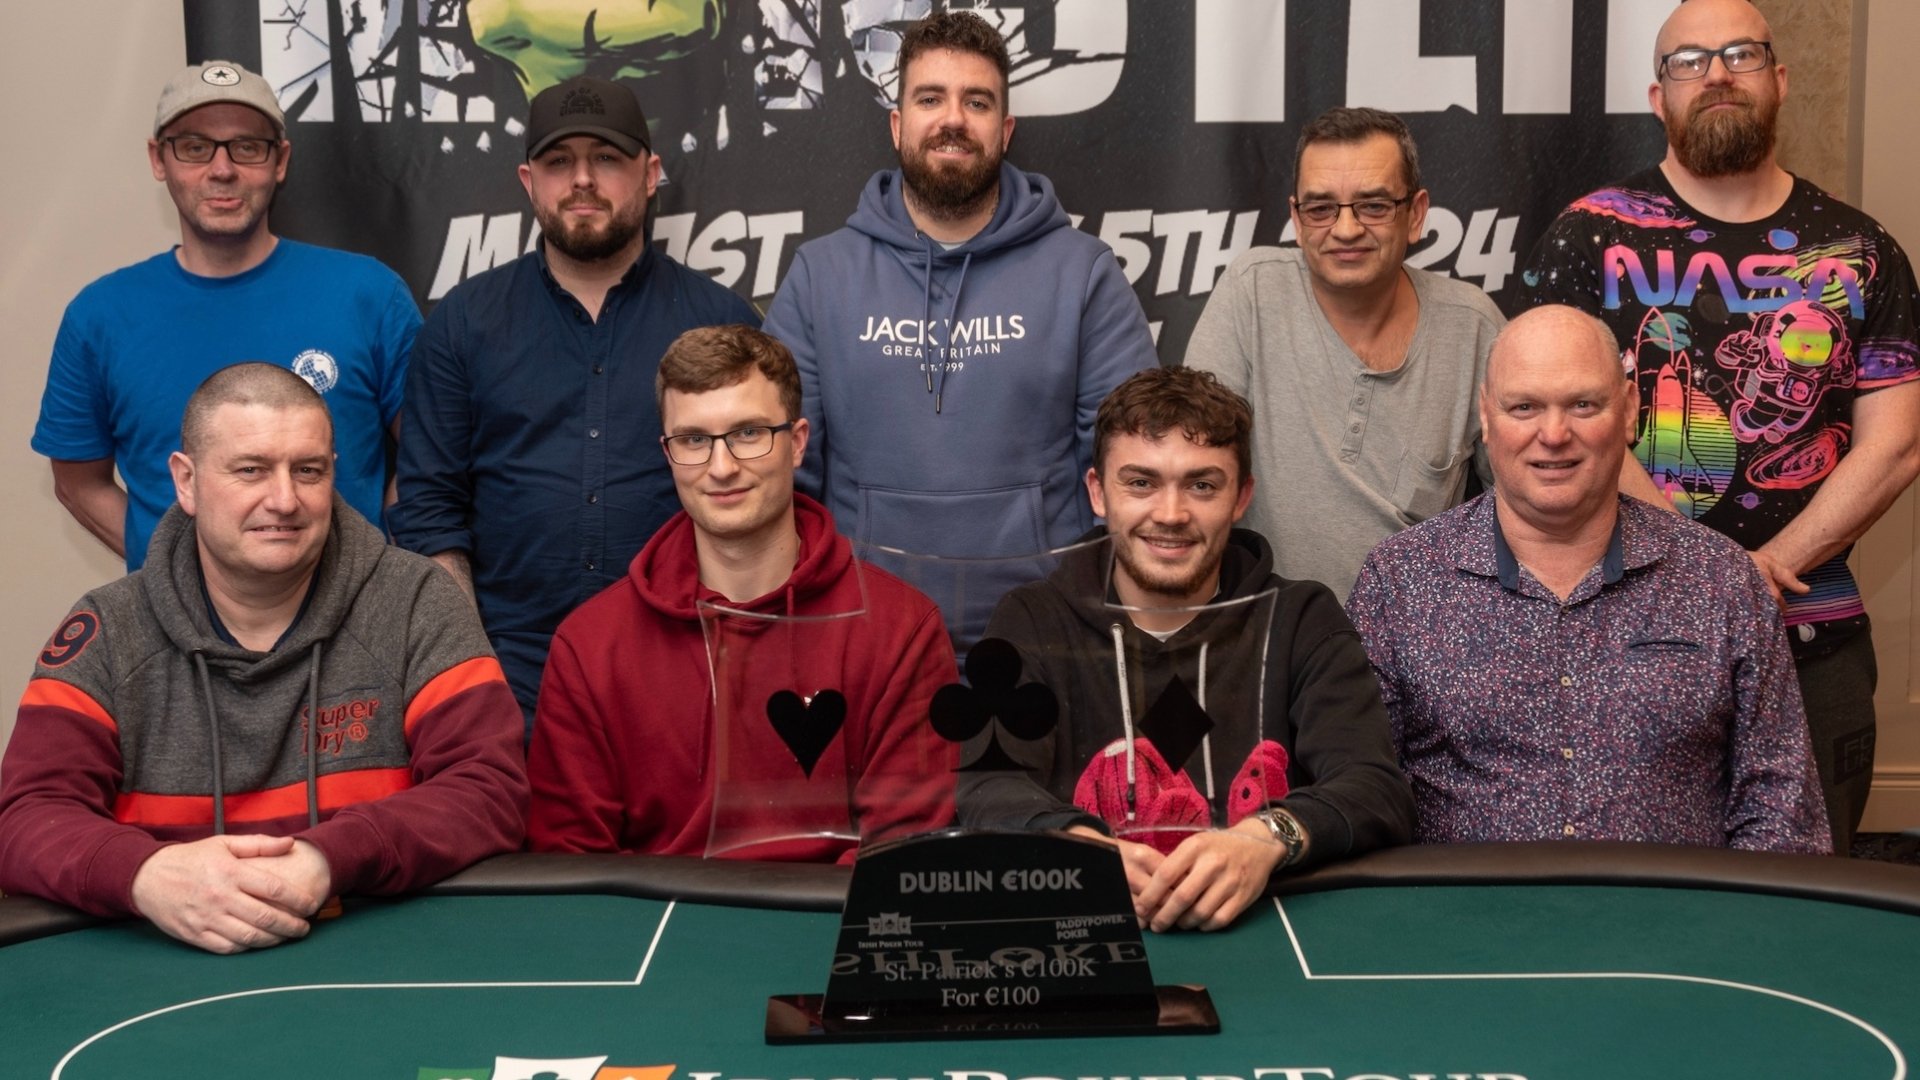 St Patrick's Day €100 for €100,000 Final Table